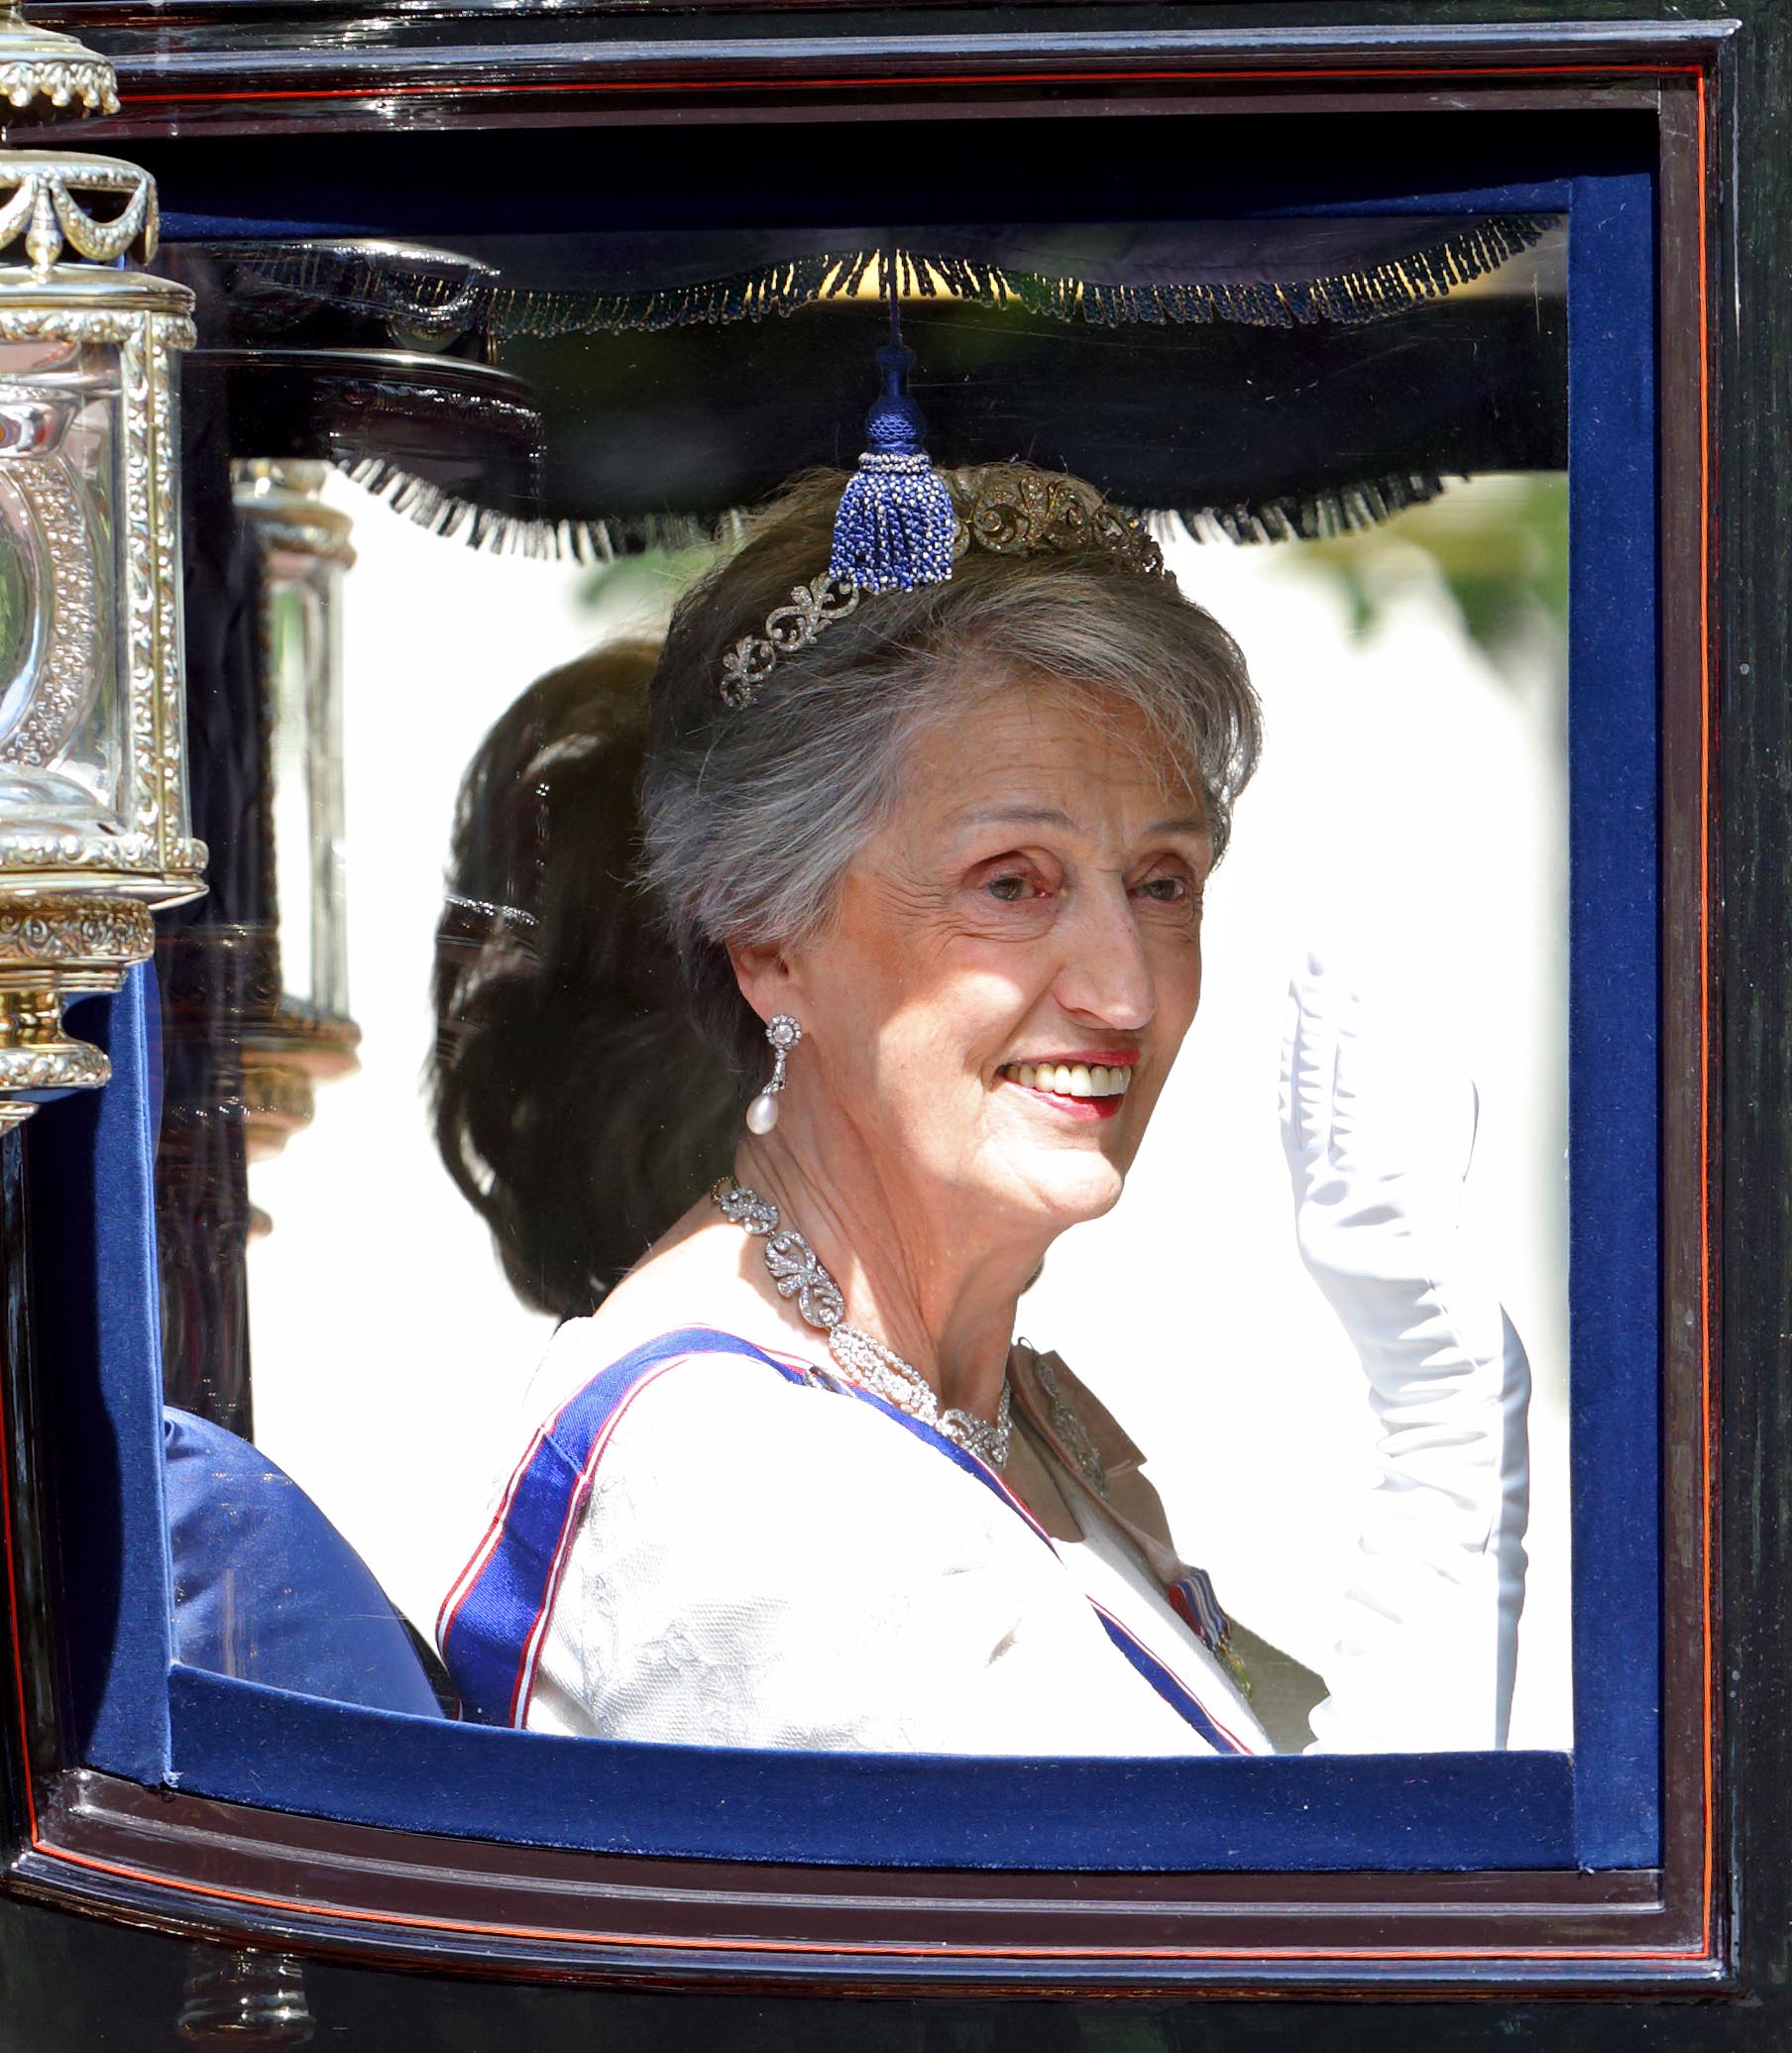 Lady Susan Hussey waving and smiling from a carriage. She is wearing diamond jewellery, a white glove and a blue sache 